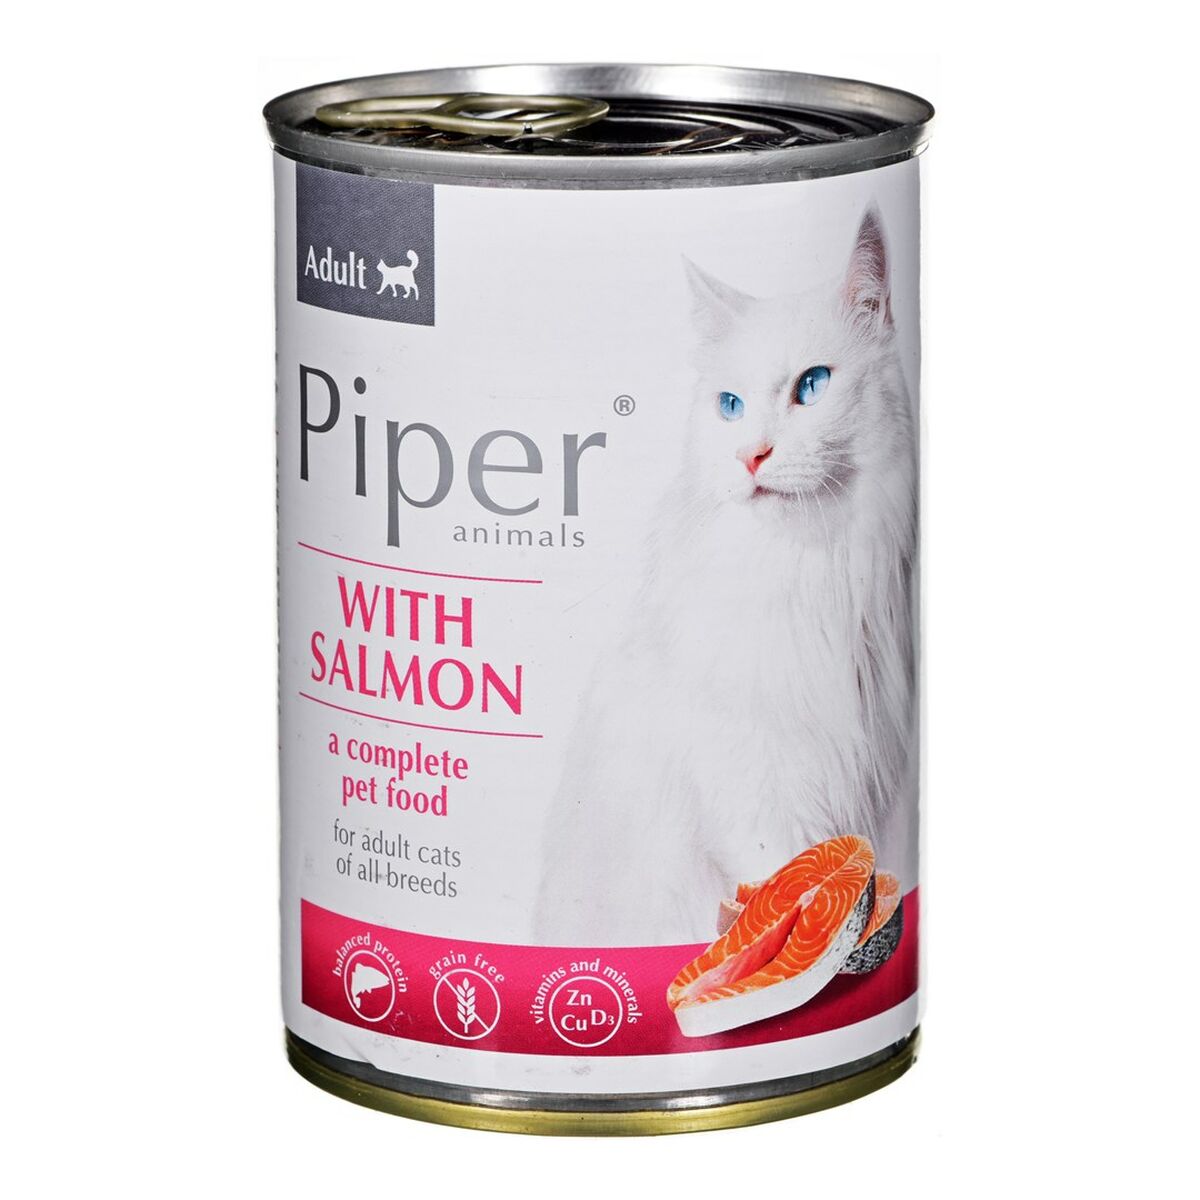 Aliments pour chat Dolina Noteci Piper Animals Saumon